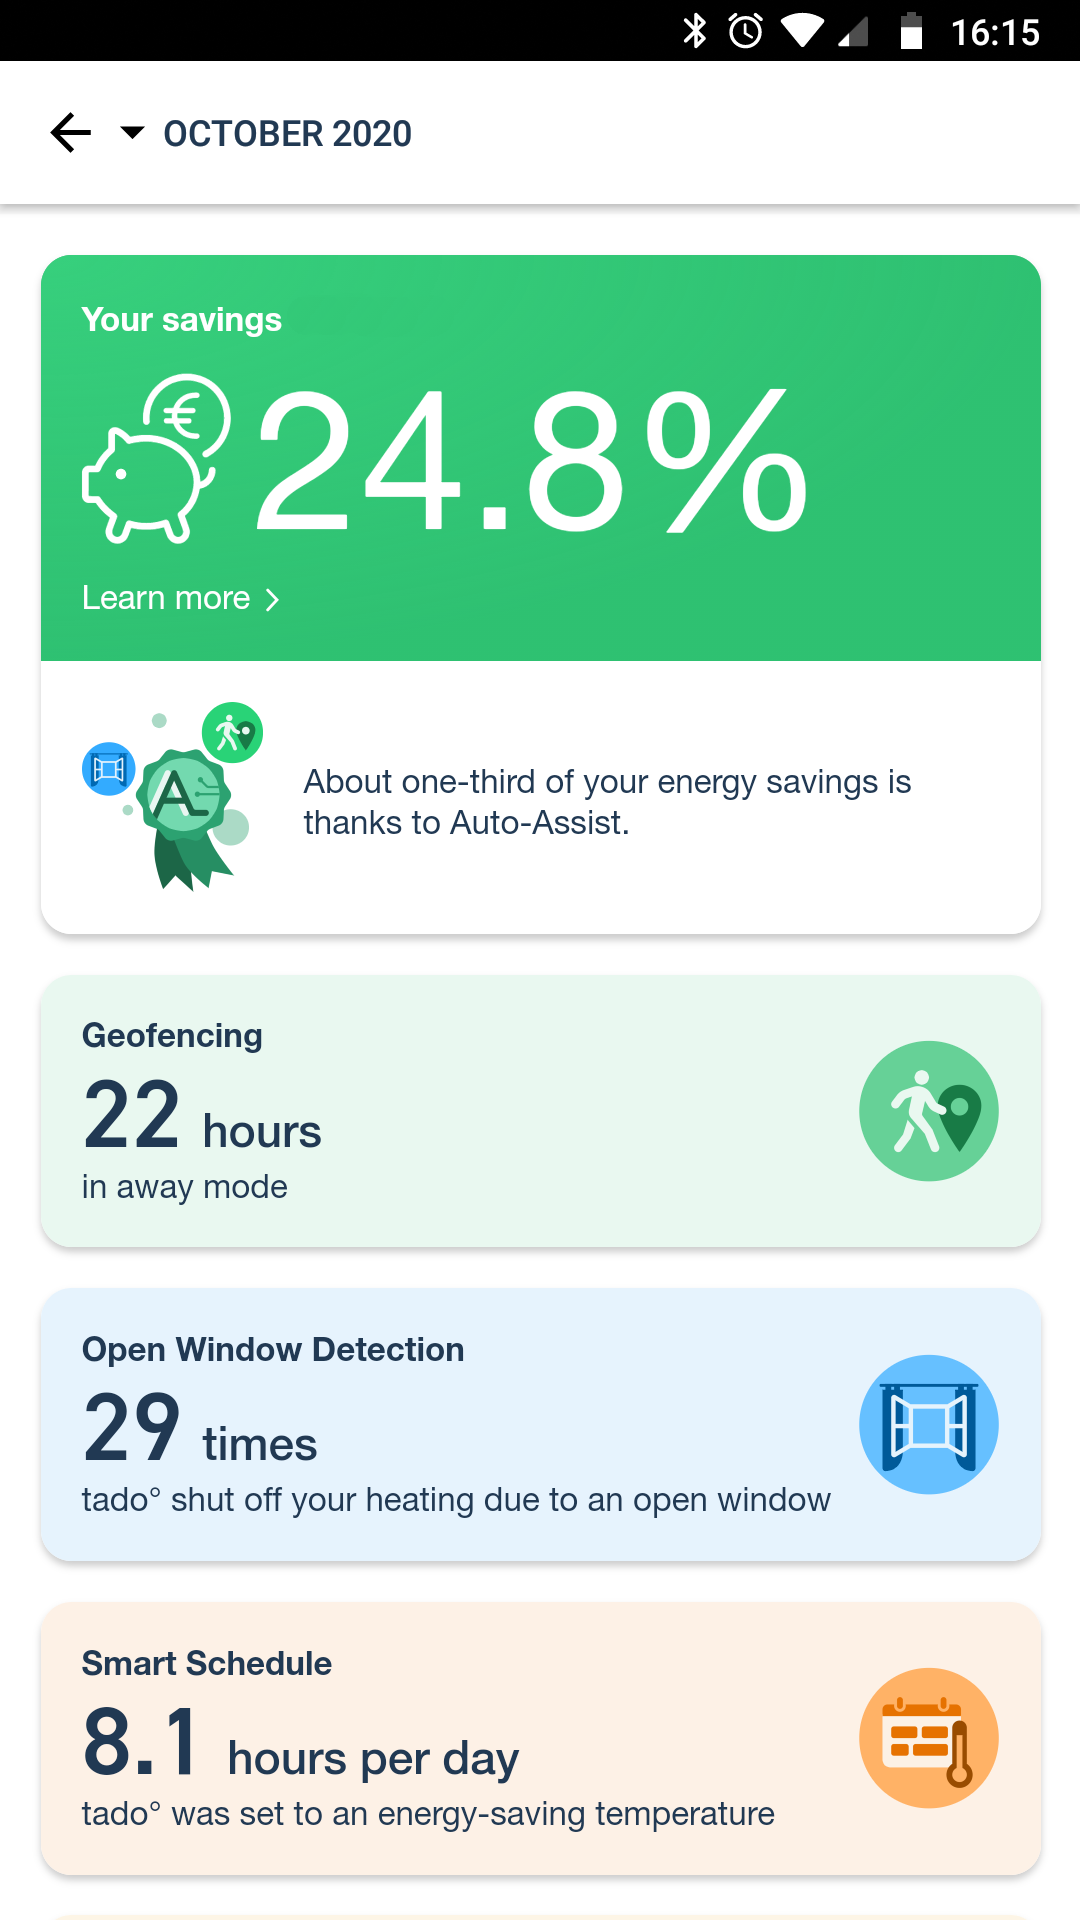 Tado Android screenshot showing a monthly 'saving' of 24.8%